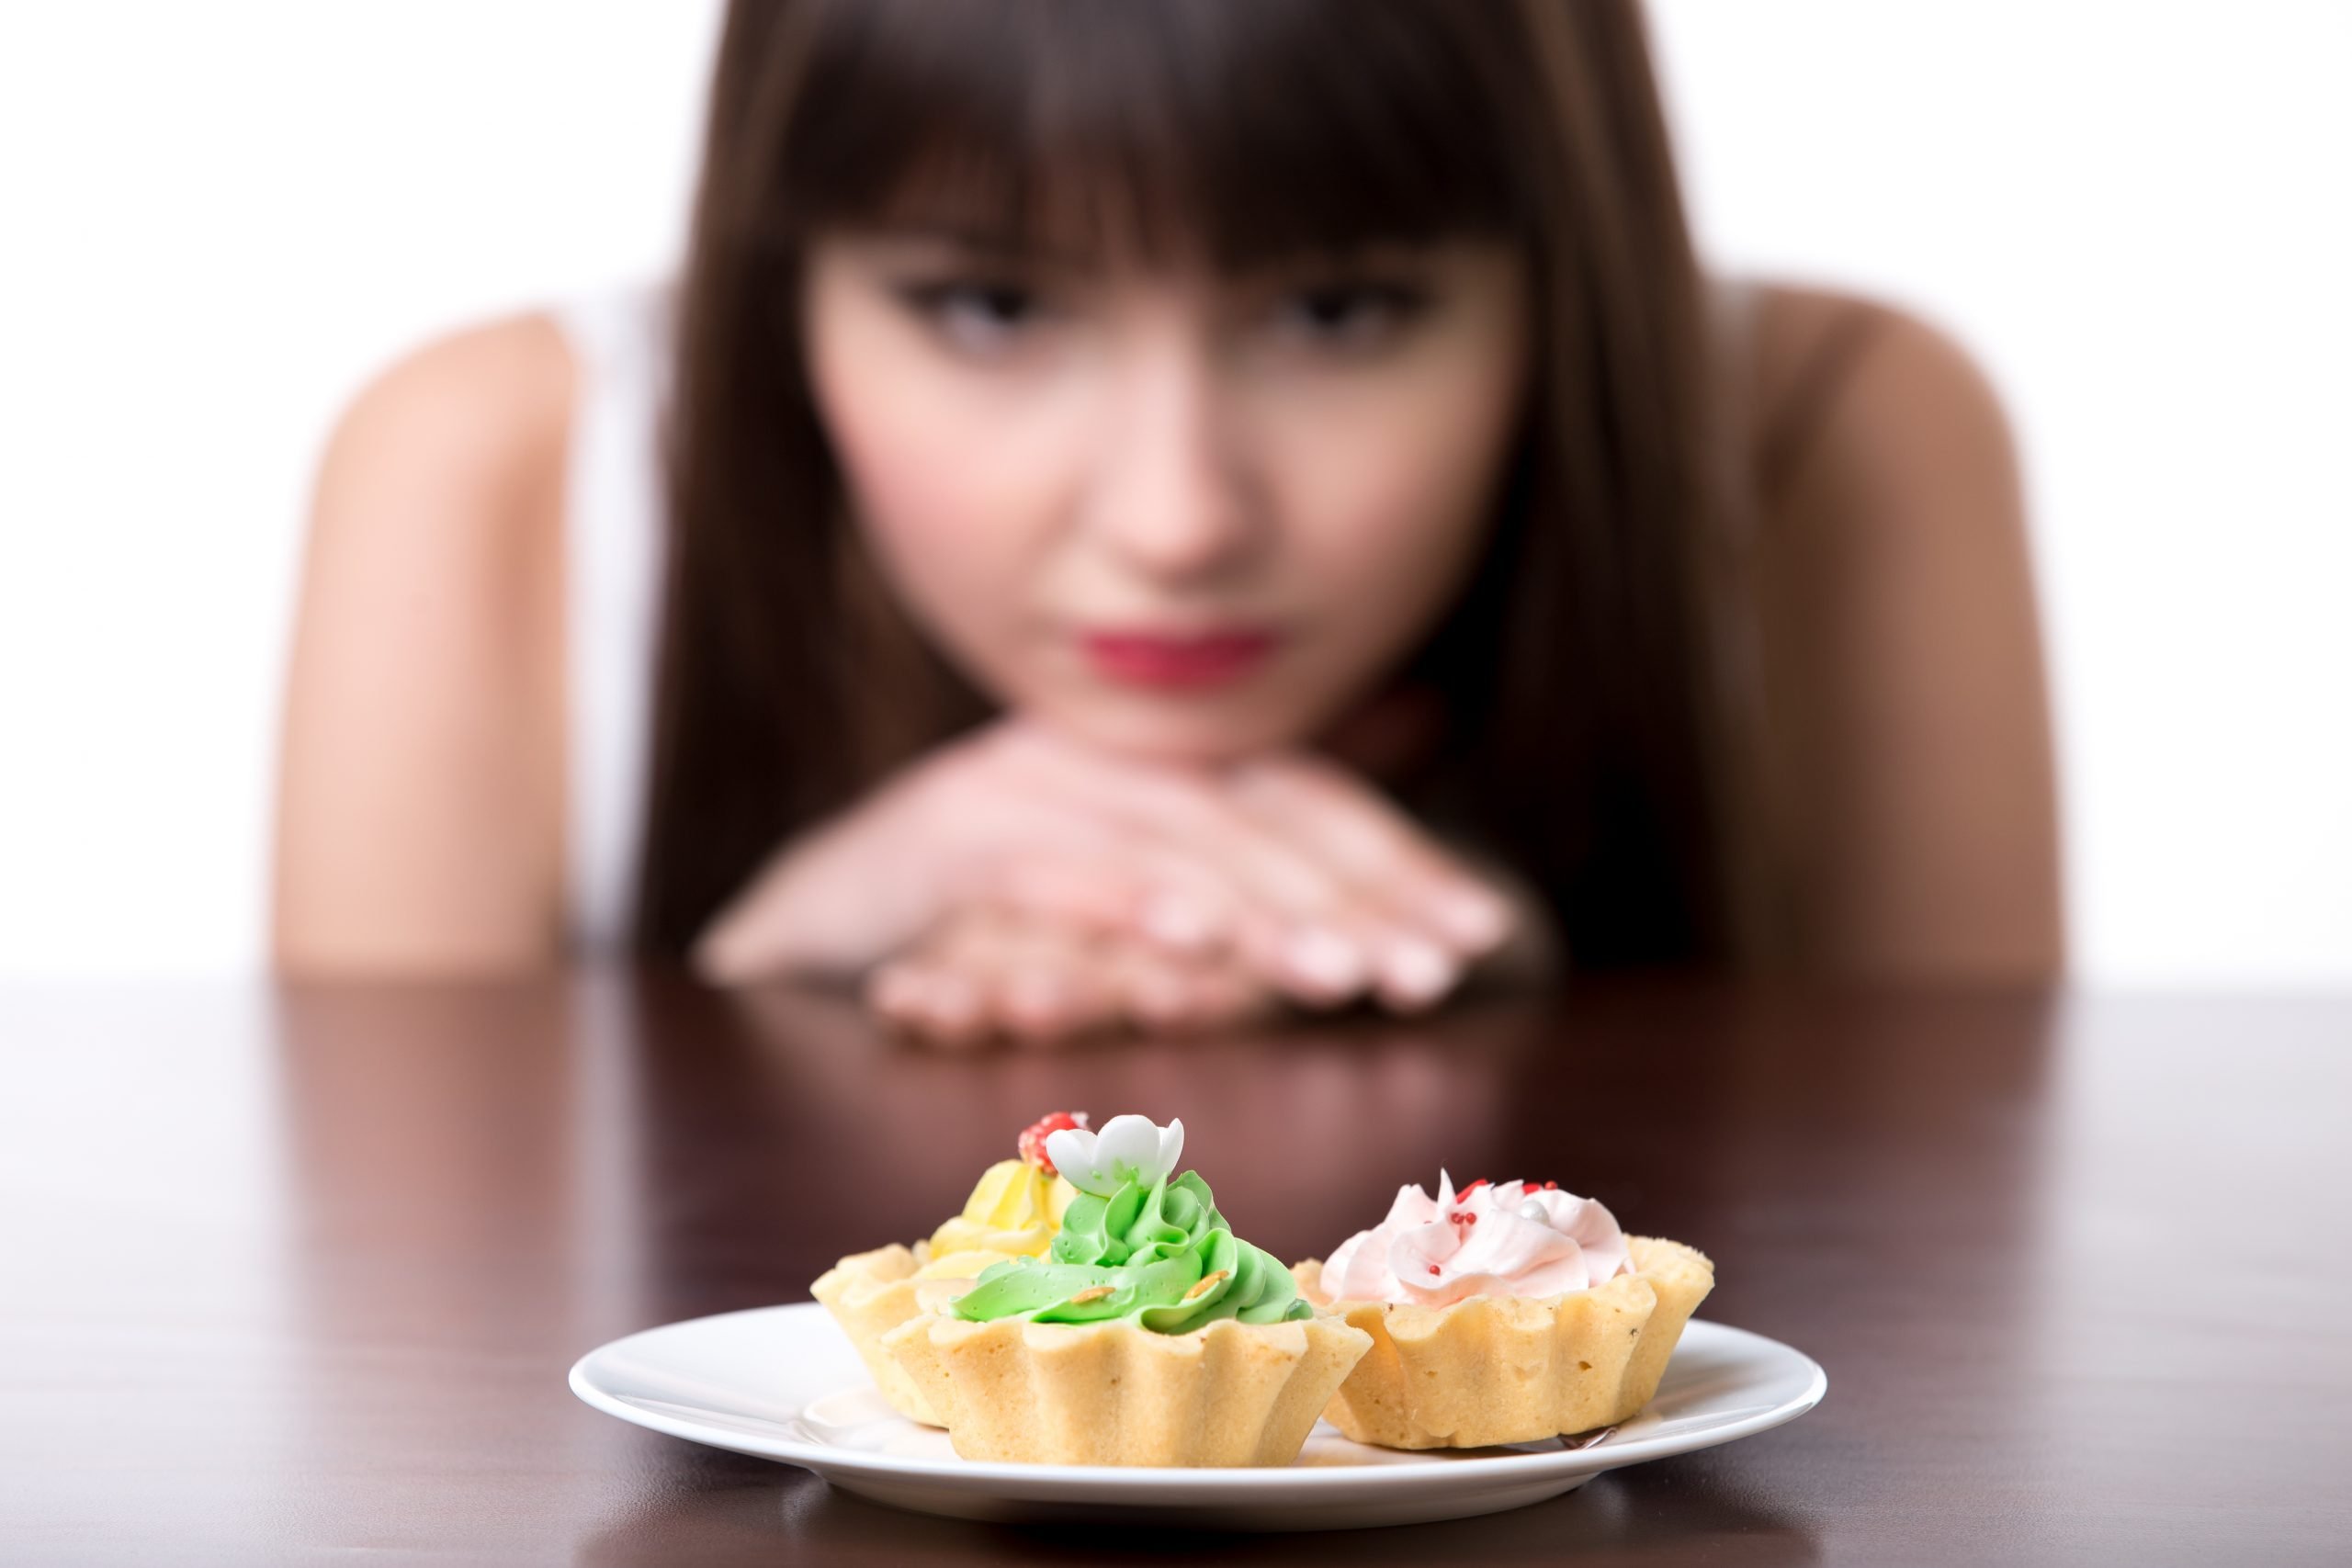 Why We Eat Sugar: How to Know if Your Behaviors Stem from Cravings ...